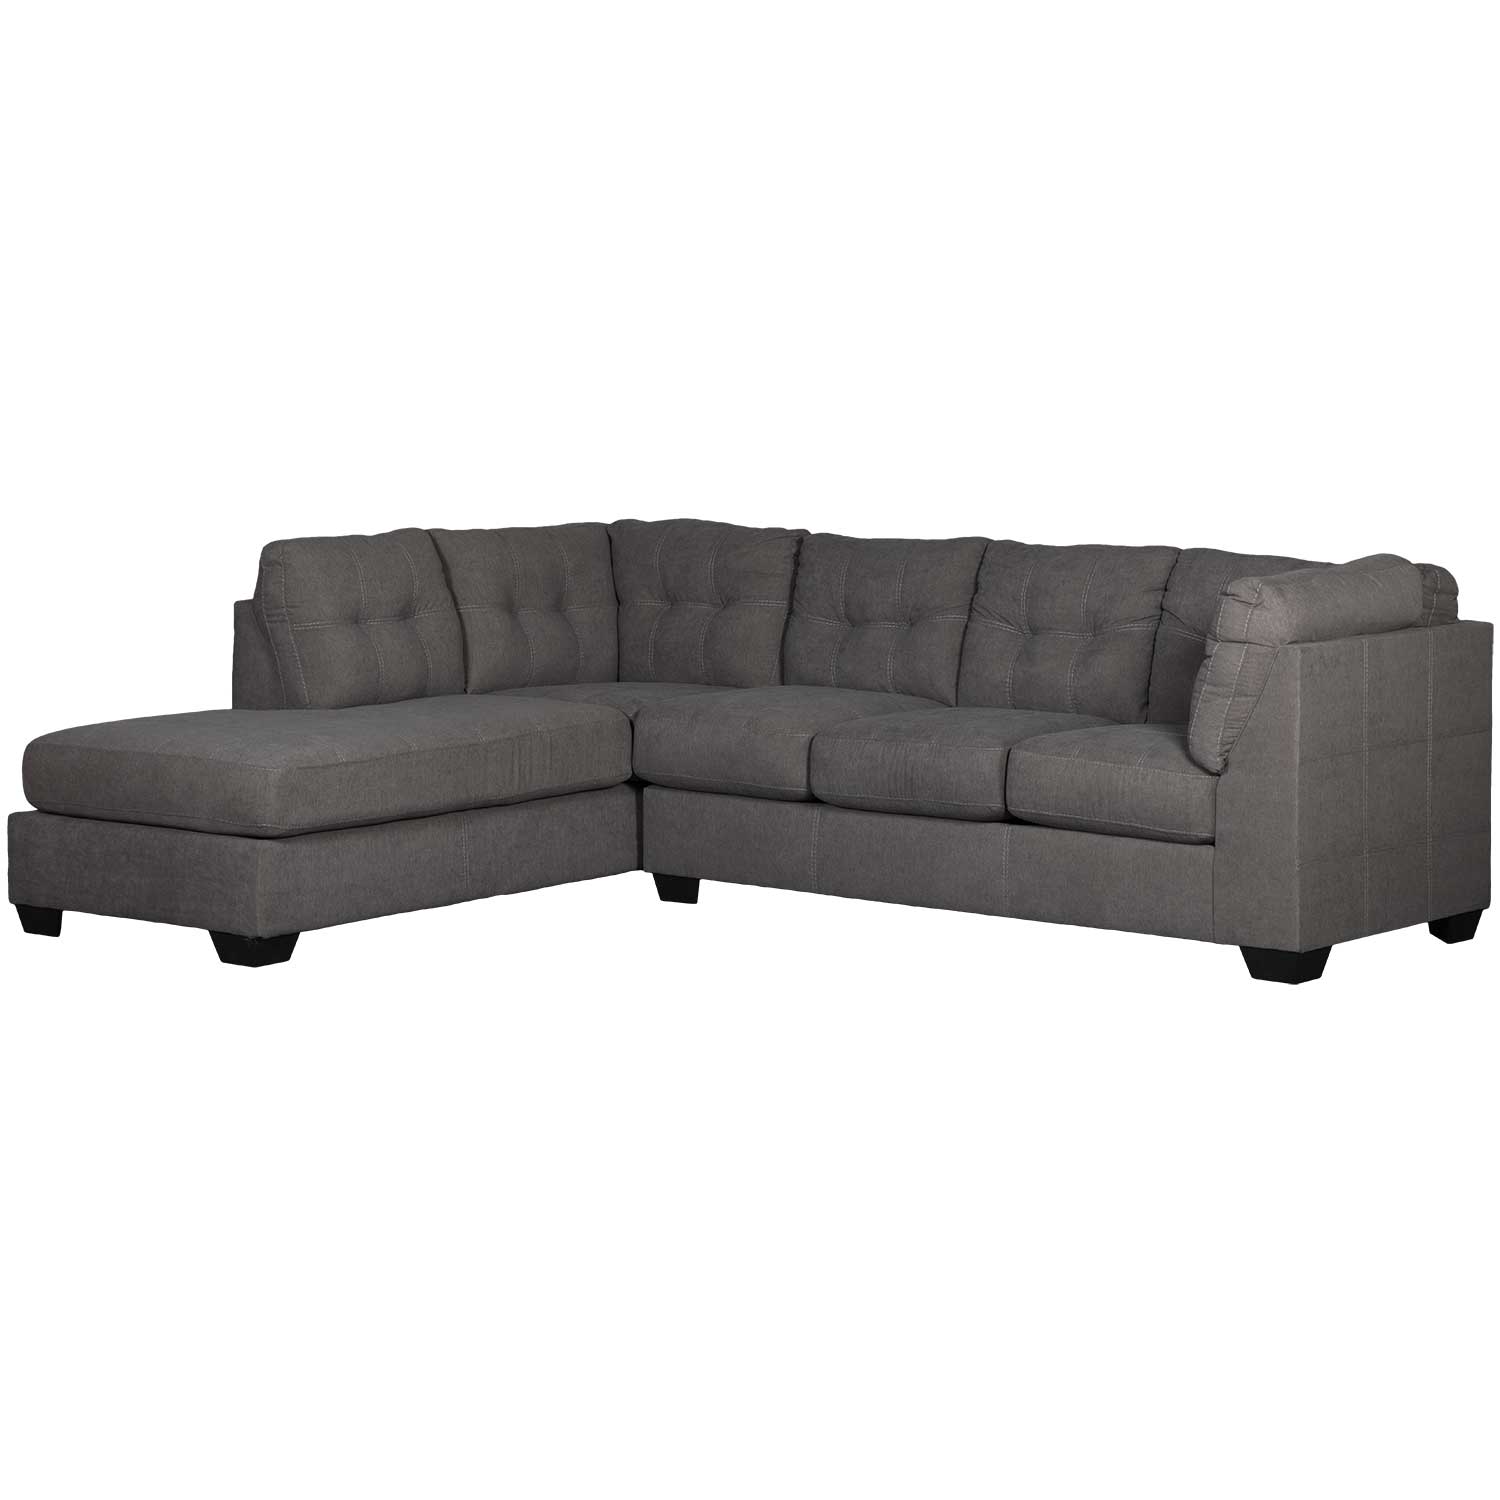 Charcoal 2pc Sectional With Laf Chaise